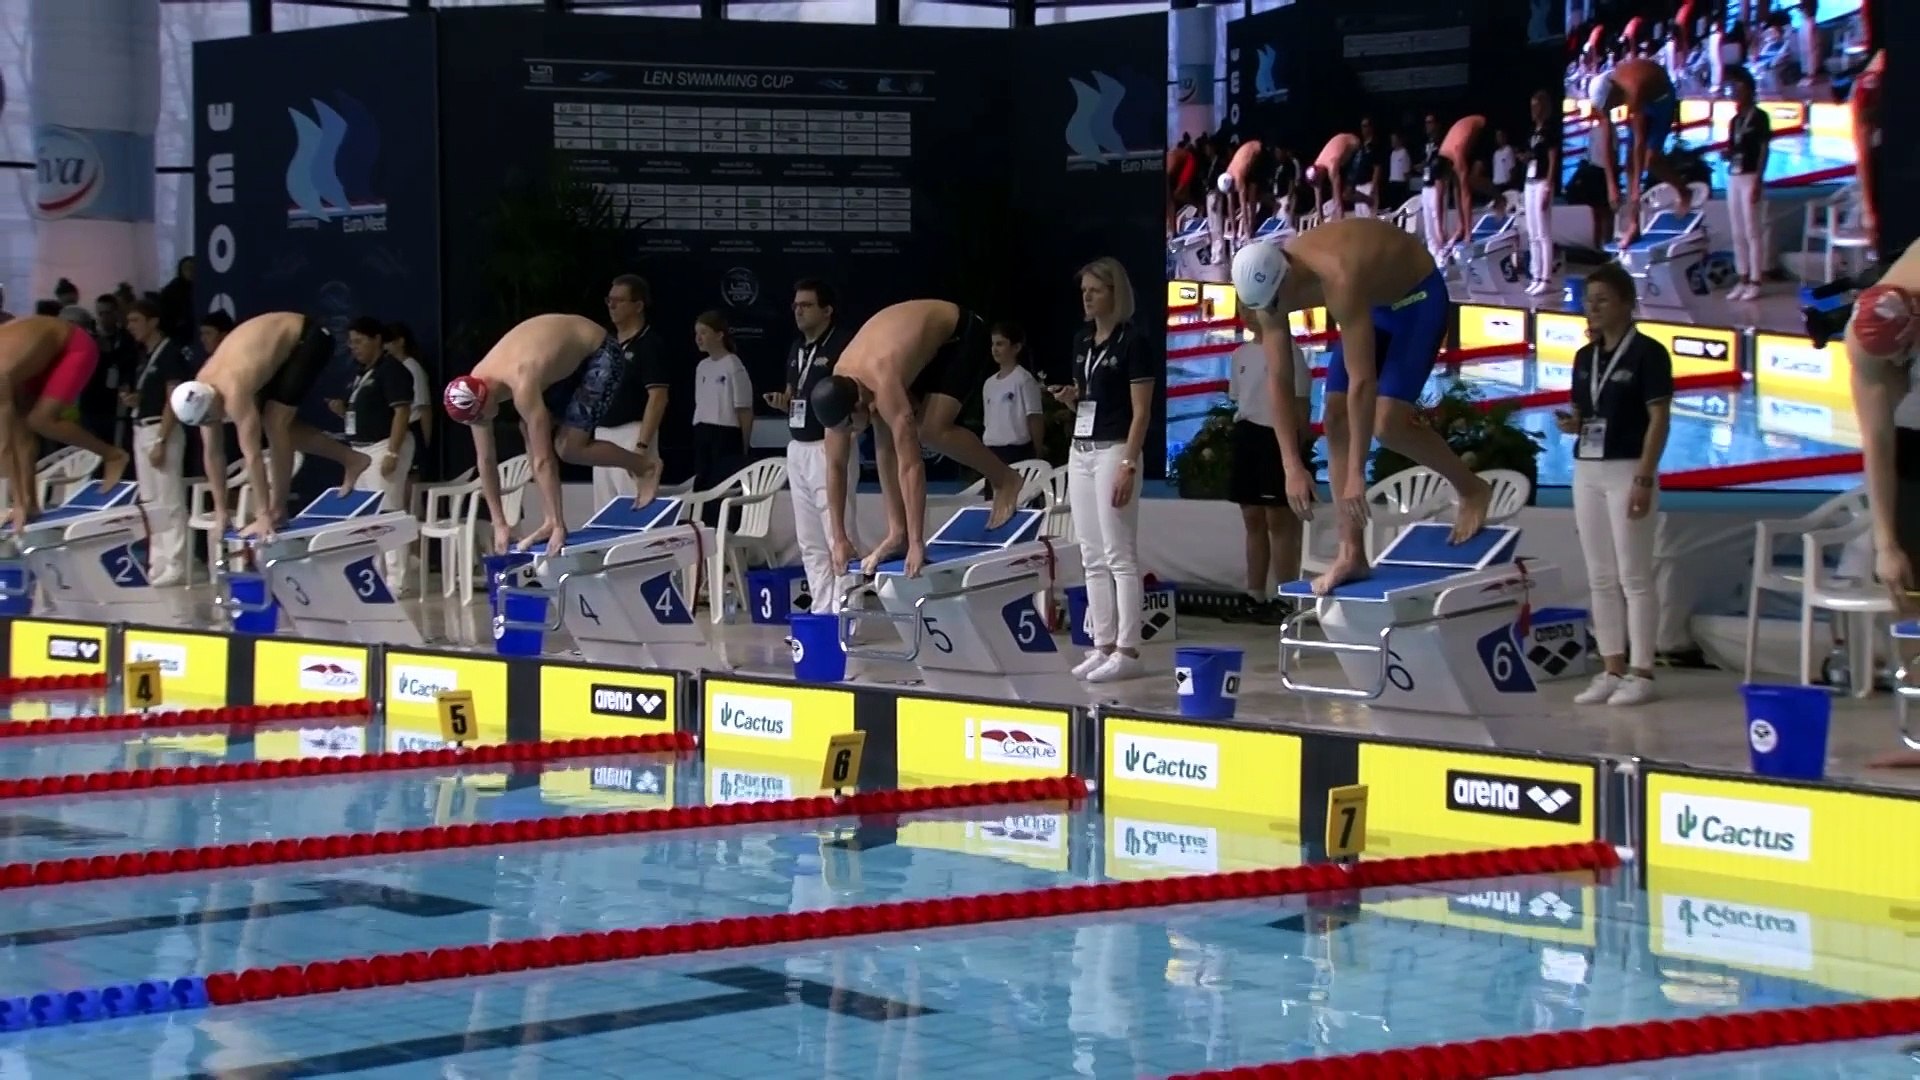 LEN SWIMMING CUP 2020 LEG 1 - FINALS -LUXEMBOURG - DAY 3 - video Dailymotion